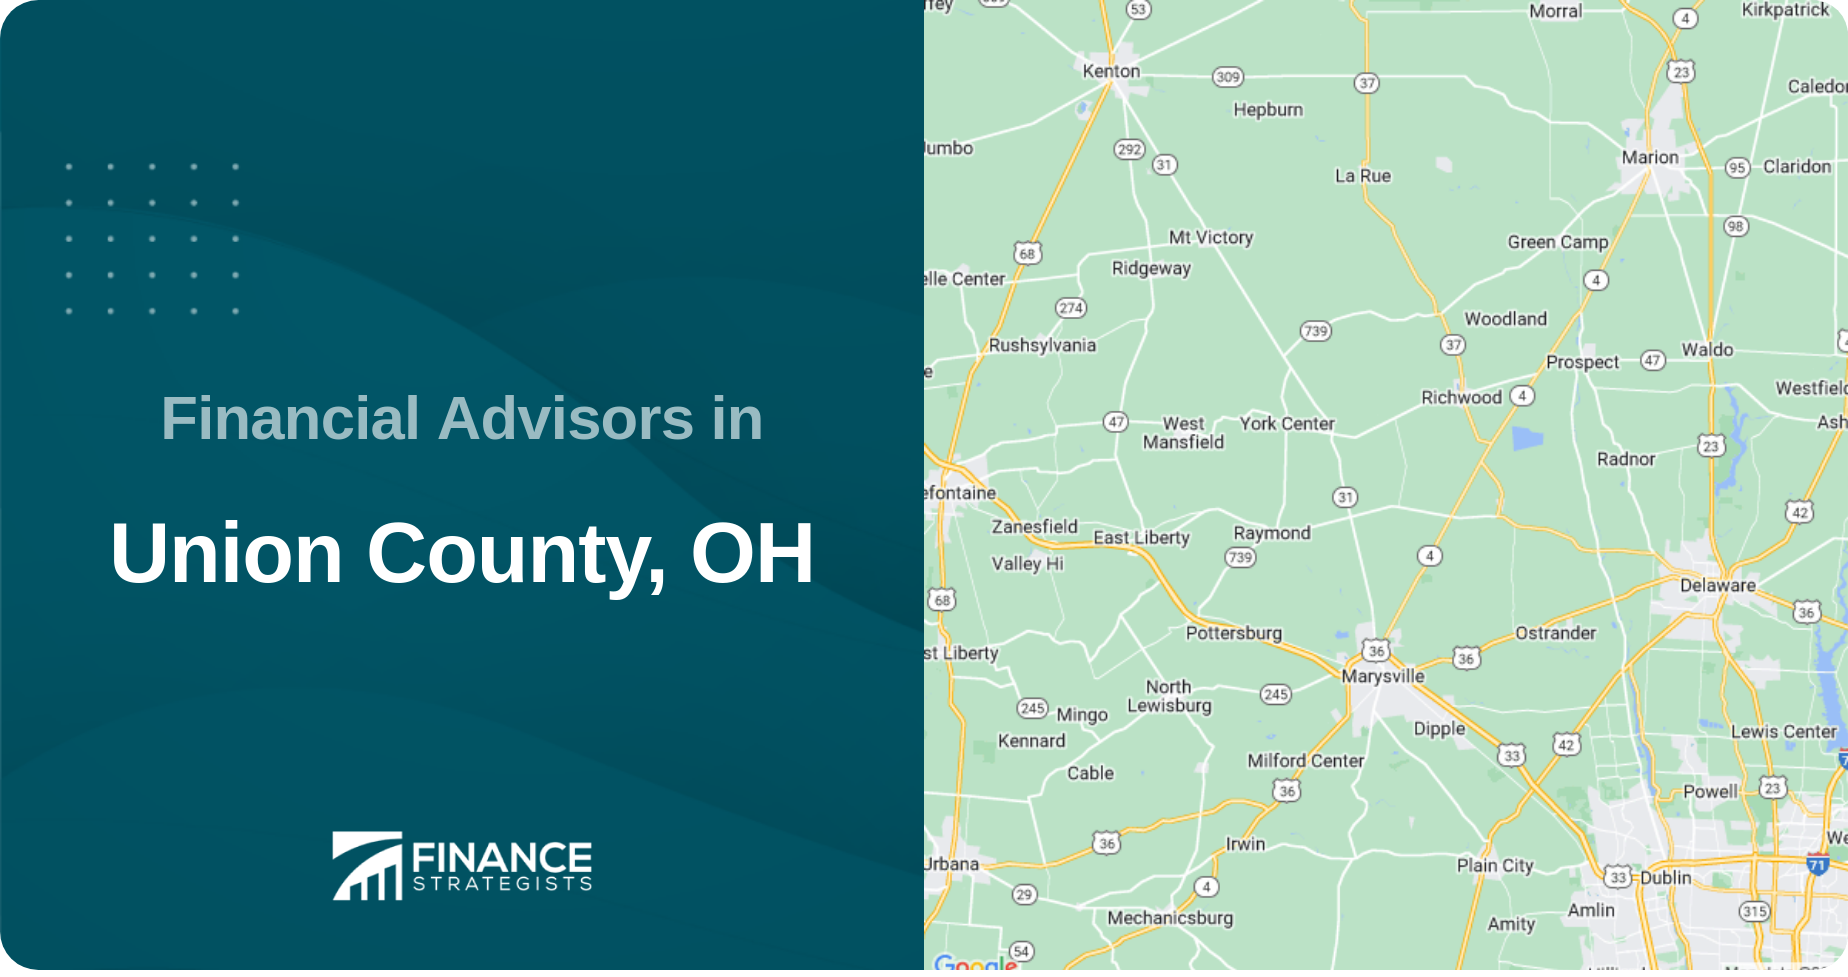 Financial Advisors in Union County, OH